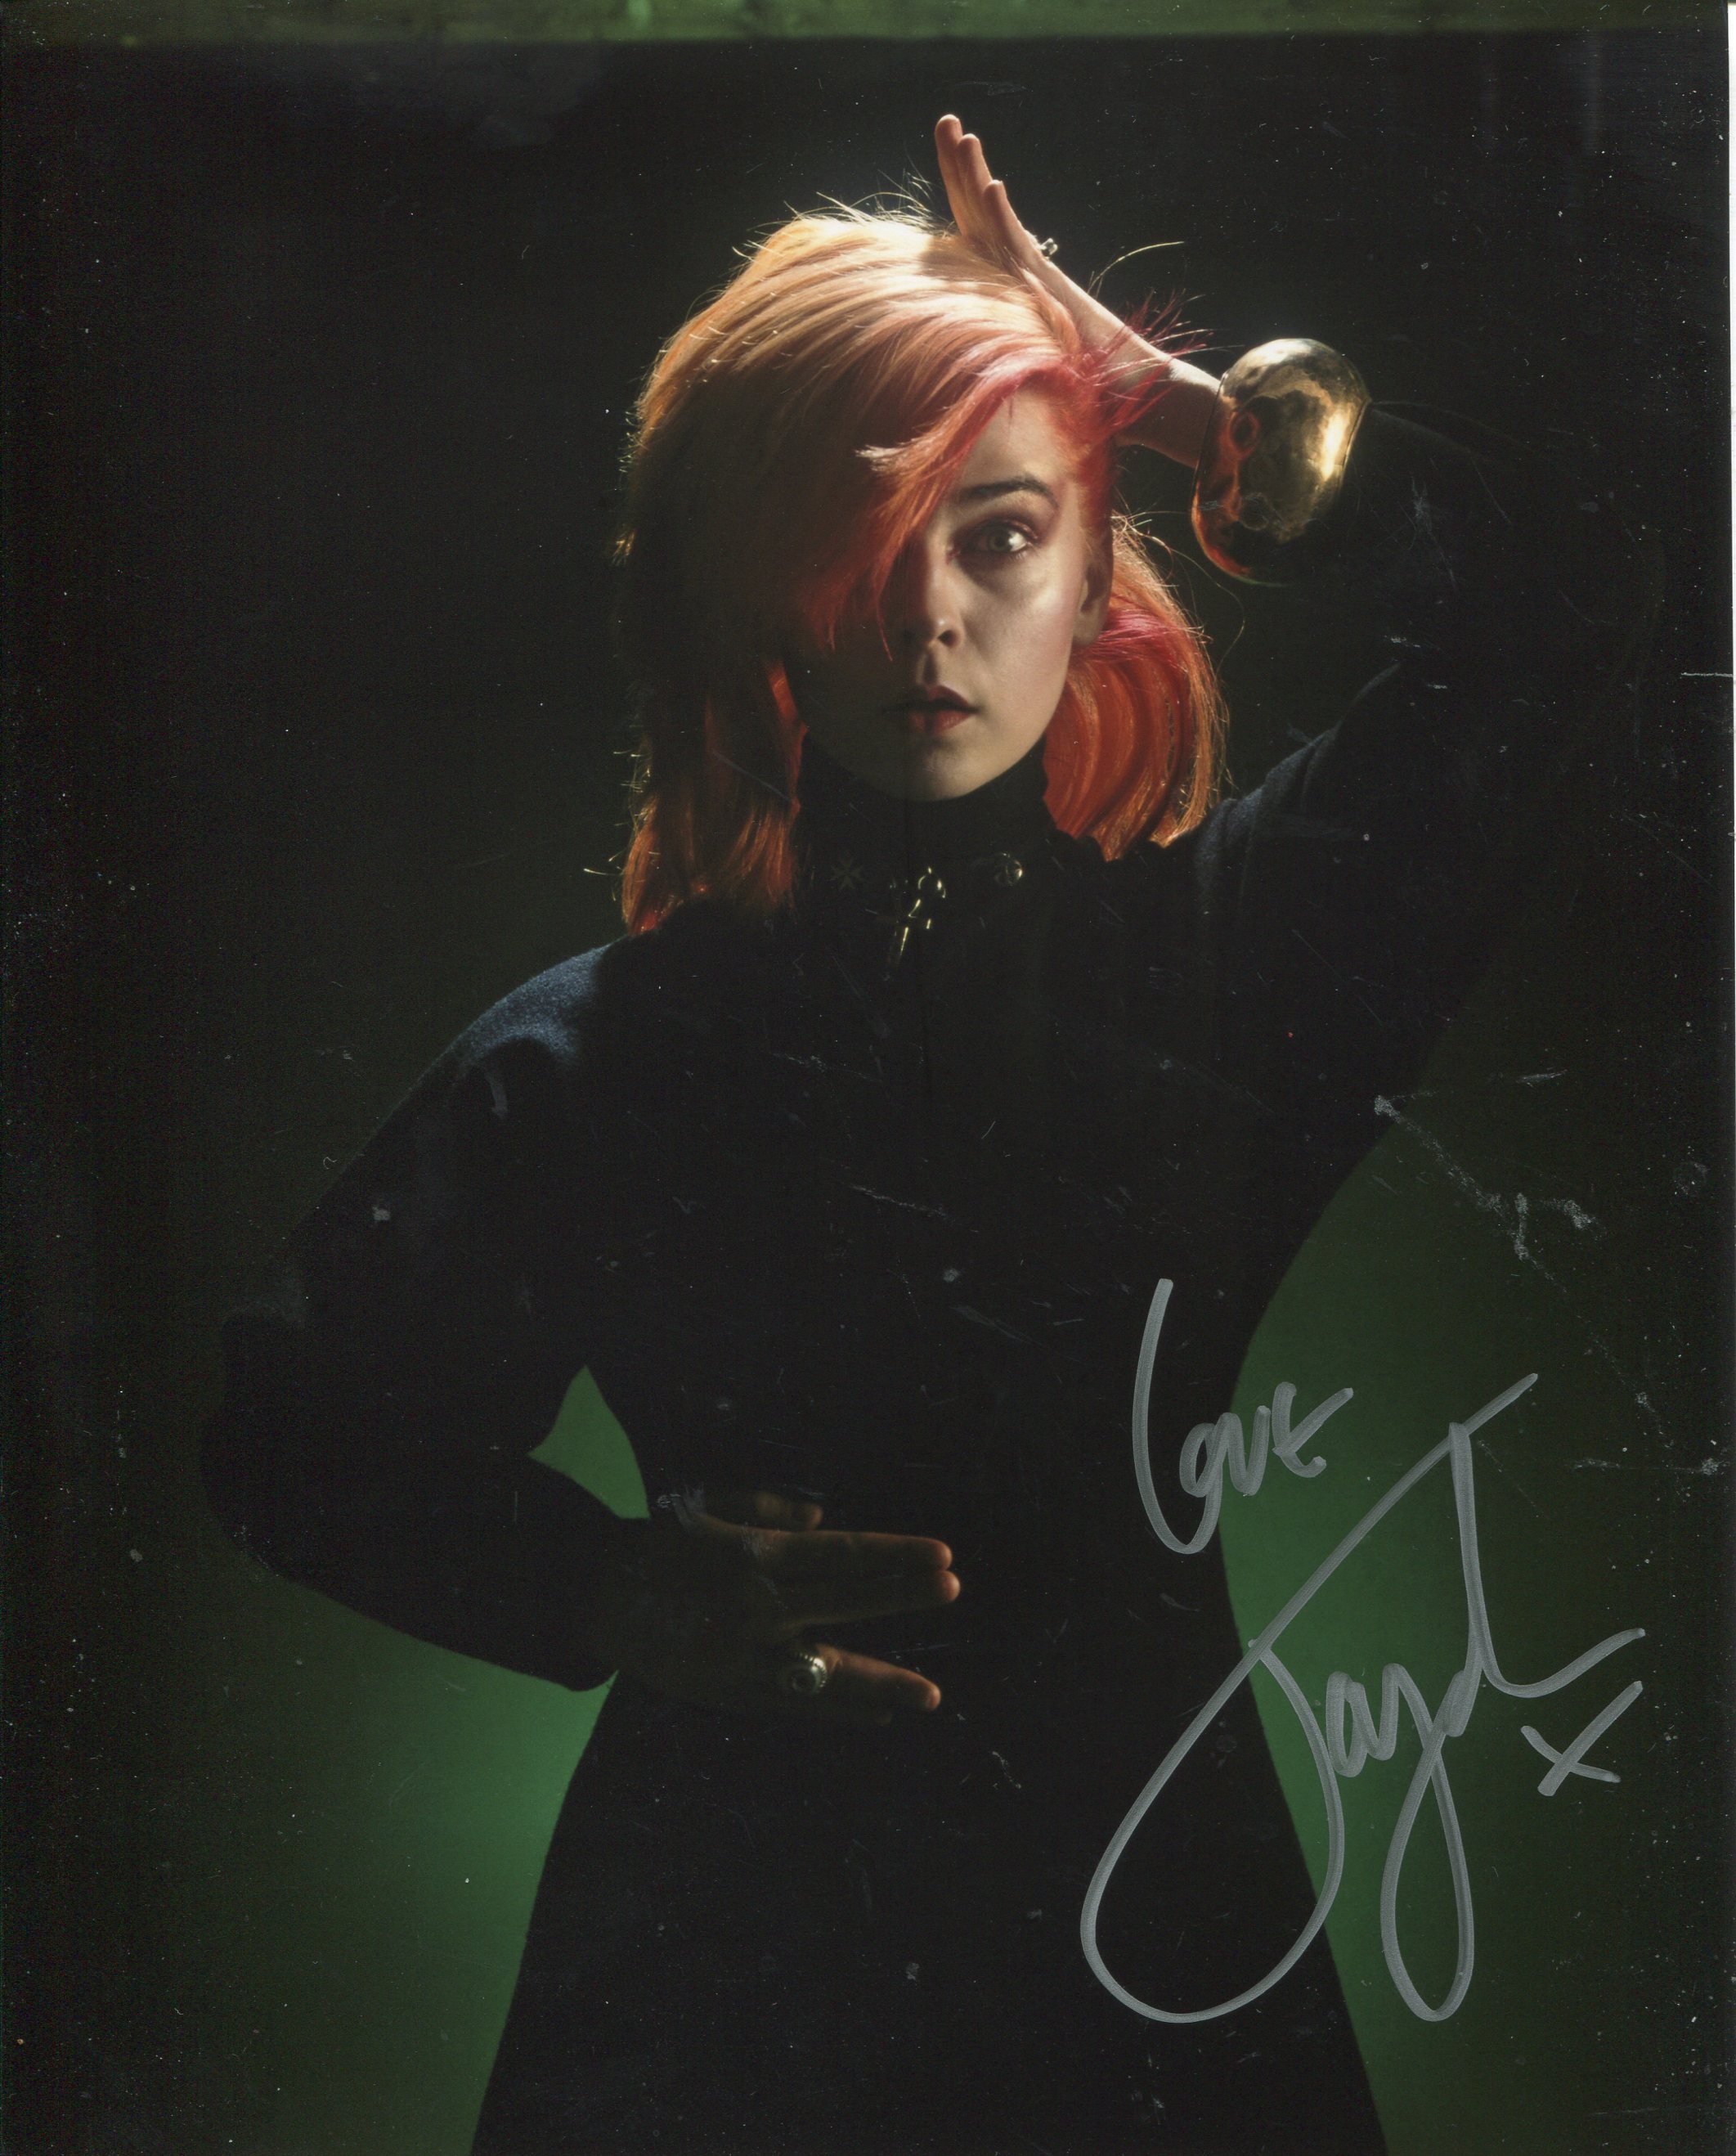 TOYAH. 8x10 inch photo signed by Punk Rock and Pop star turned actress and TV presenter, Toyah